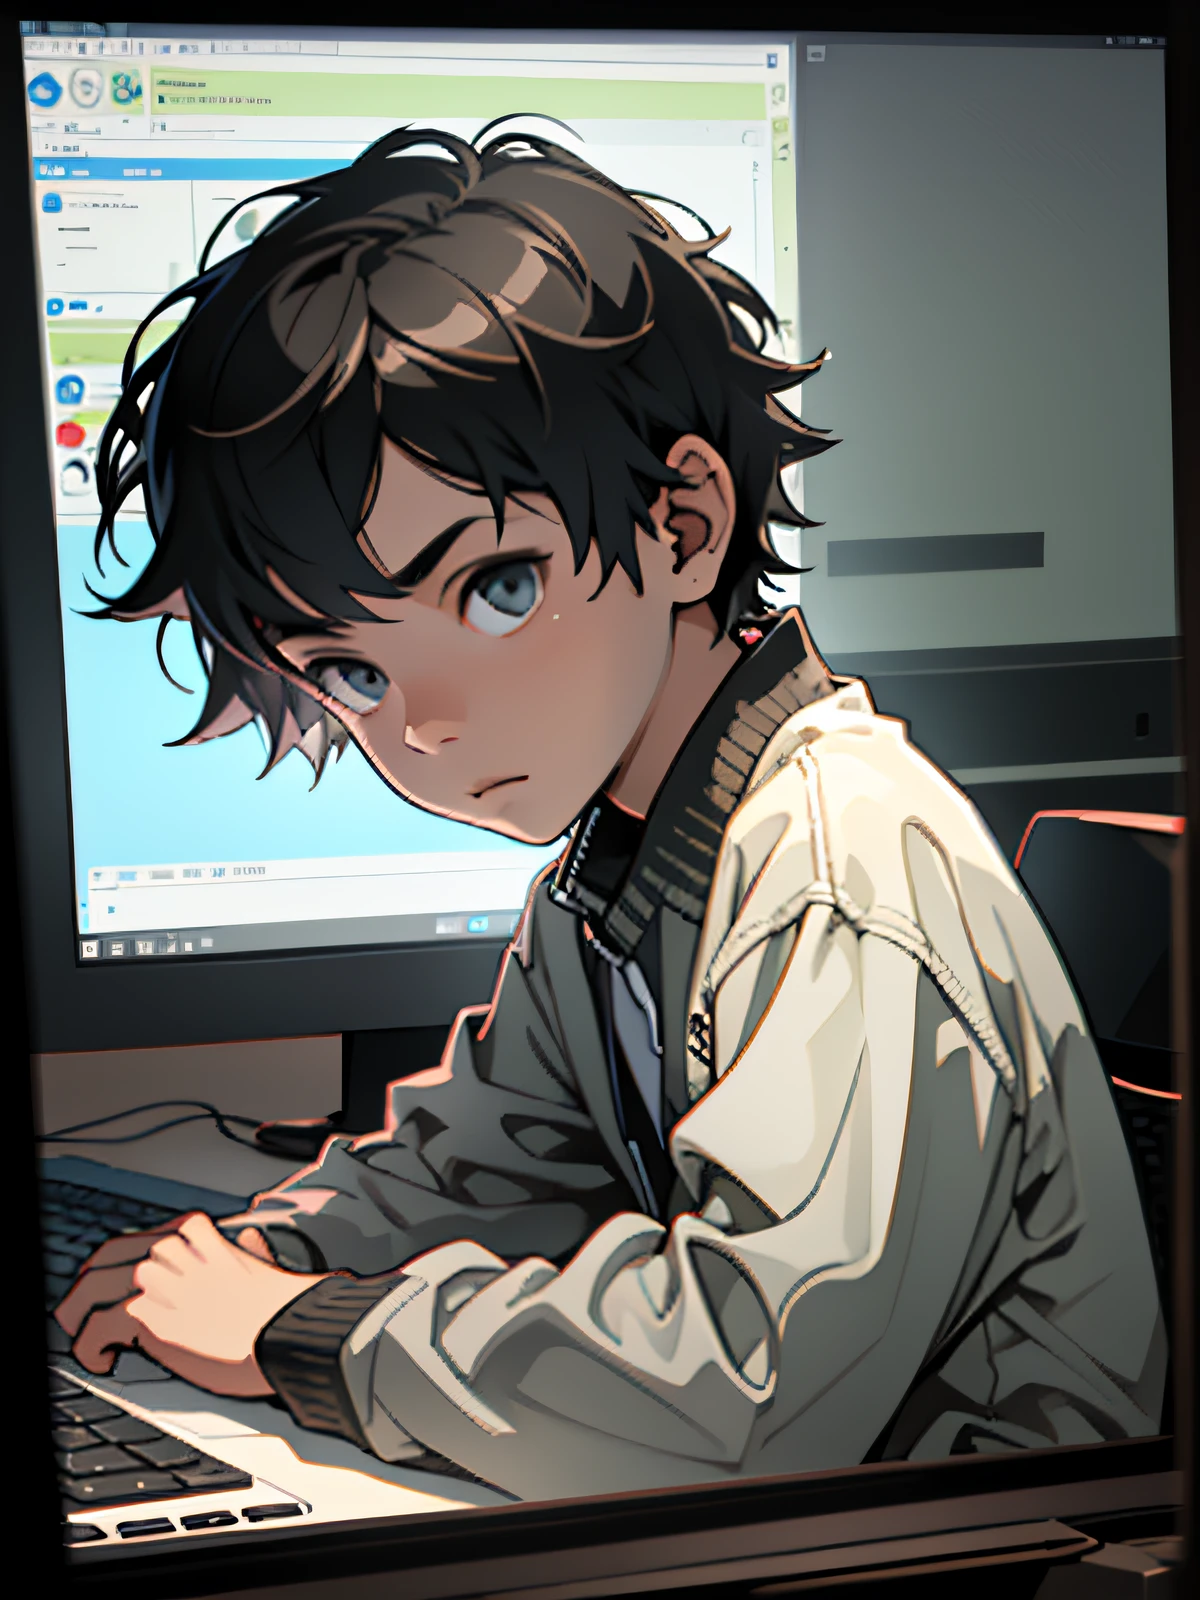 (best quality) A young boy, (meticulously detailed) sits in front of his (high-tech) computer, (dramatic shadow) casting across his face as he concentrates on the screen. --auto --s2